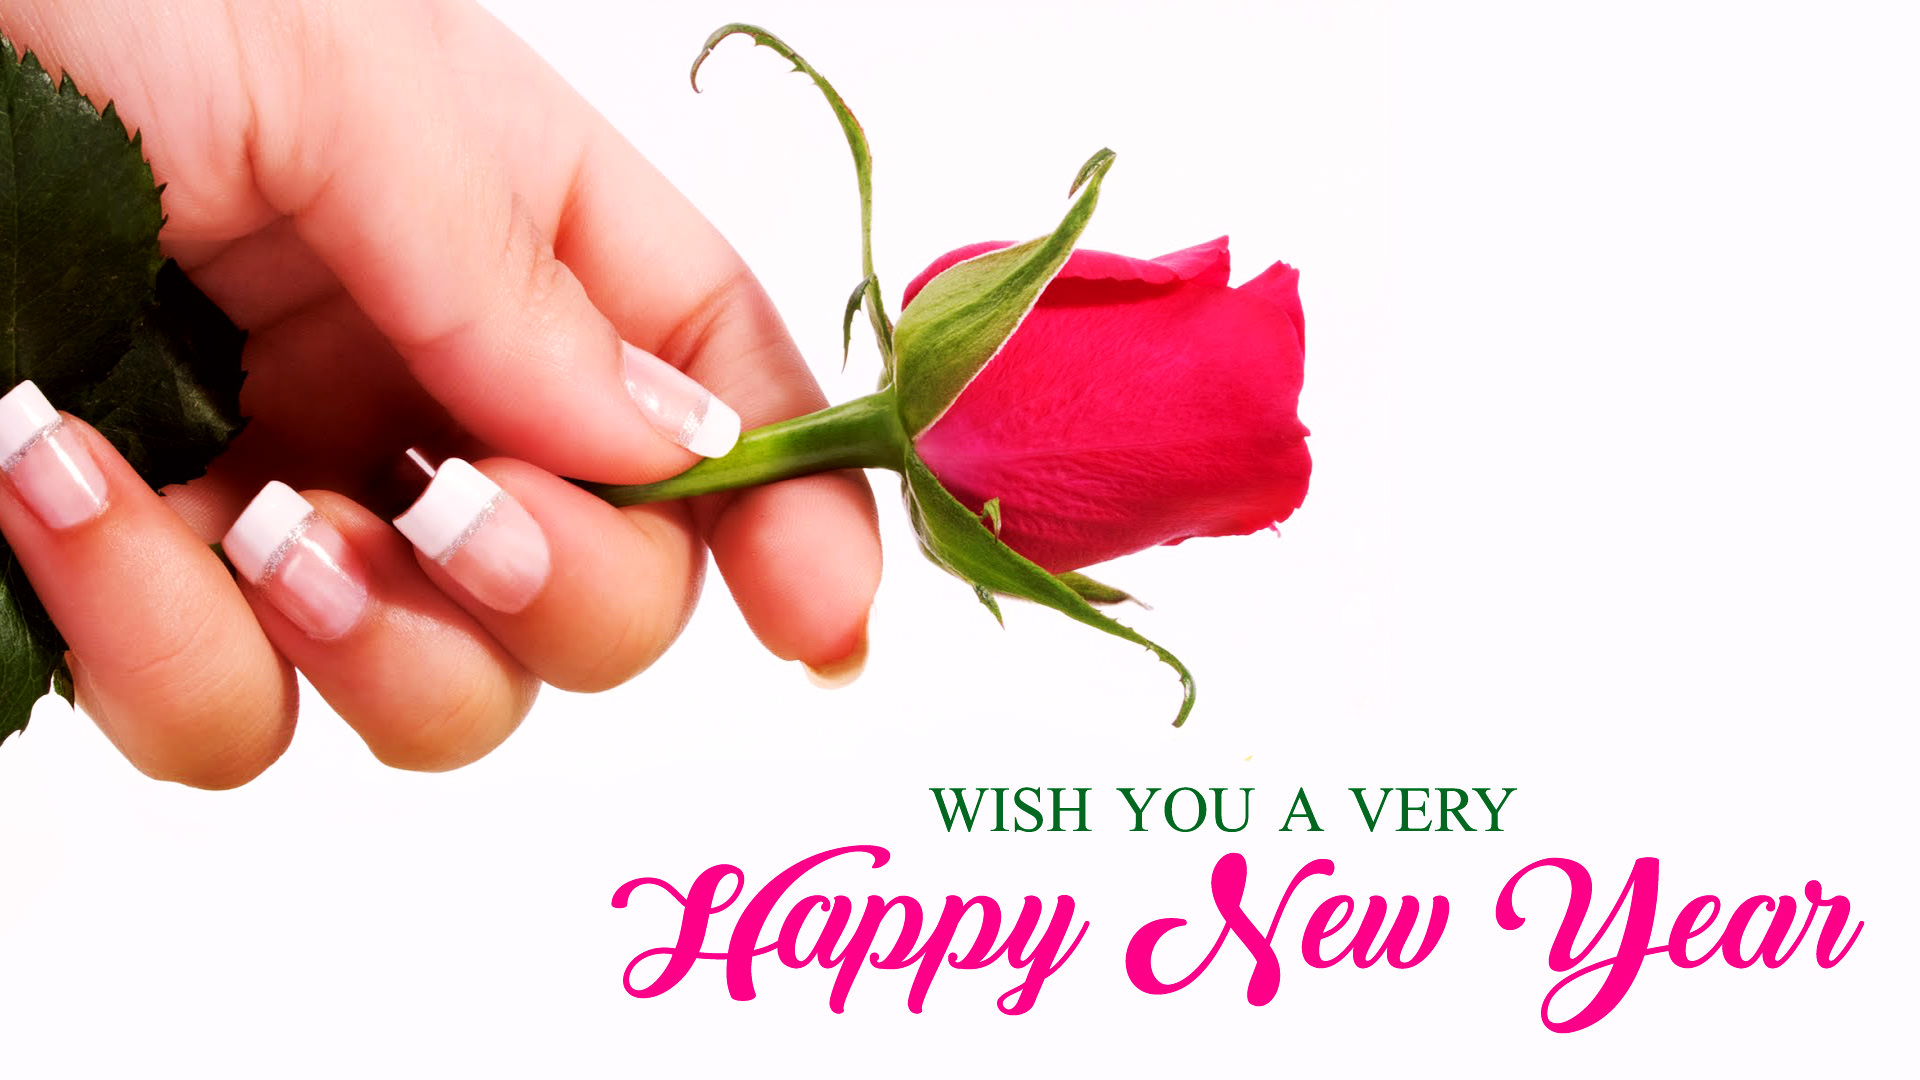 Happy New Year Wishes Wallpaper with Rose